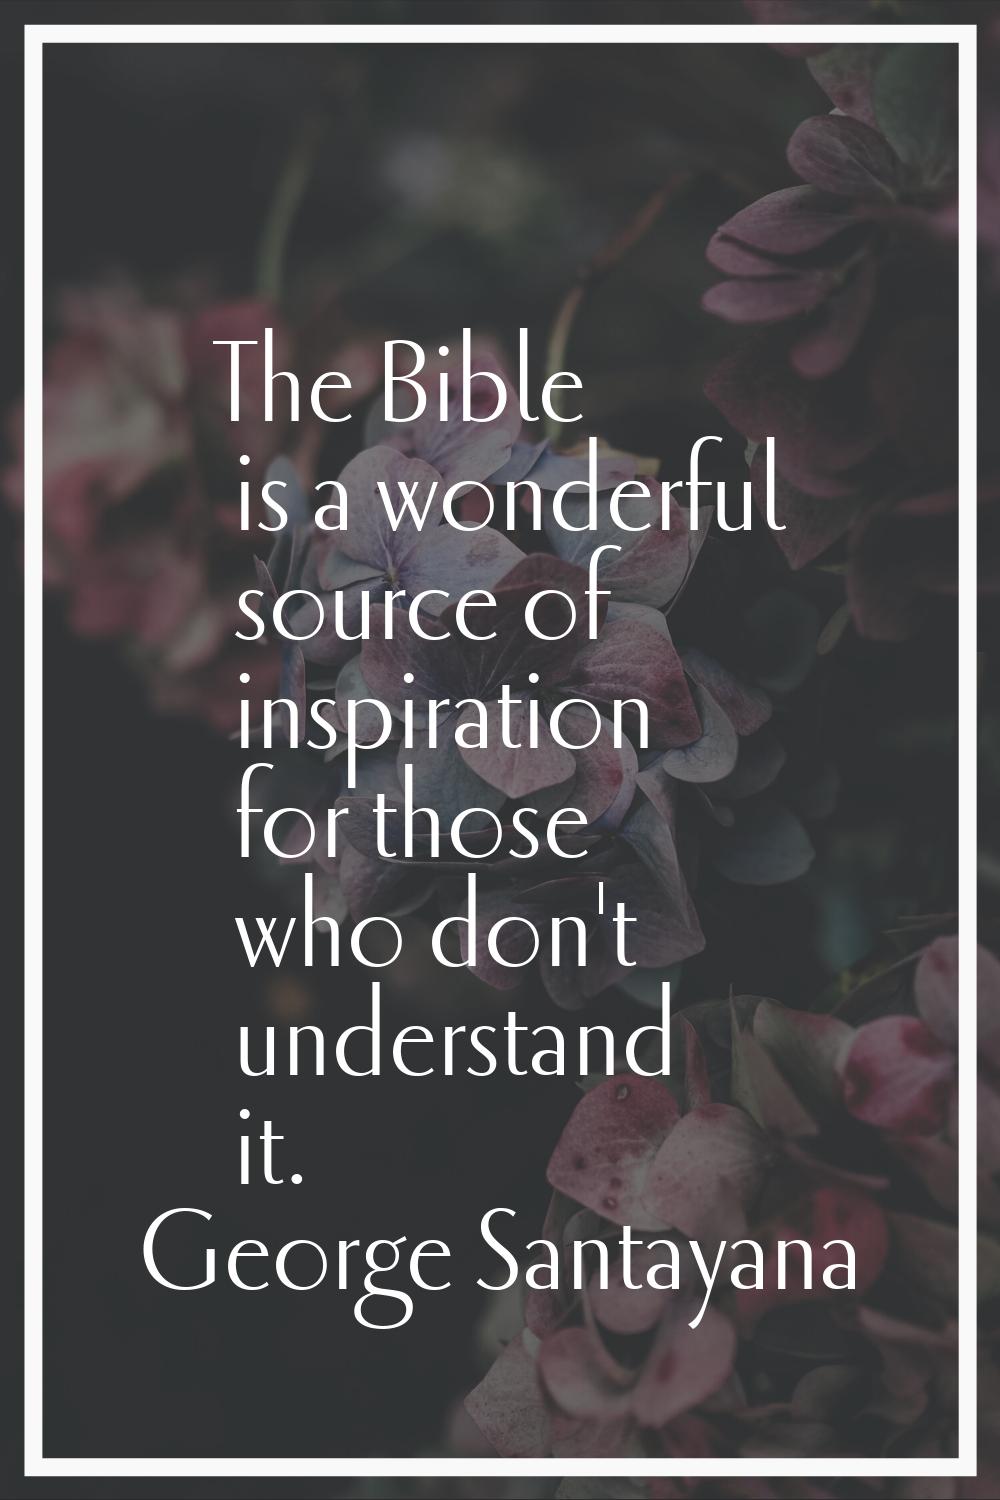 The Bible is a wonderful source of inspiration for those who don't understand it.